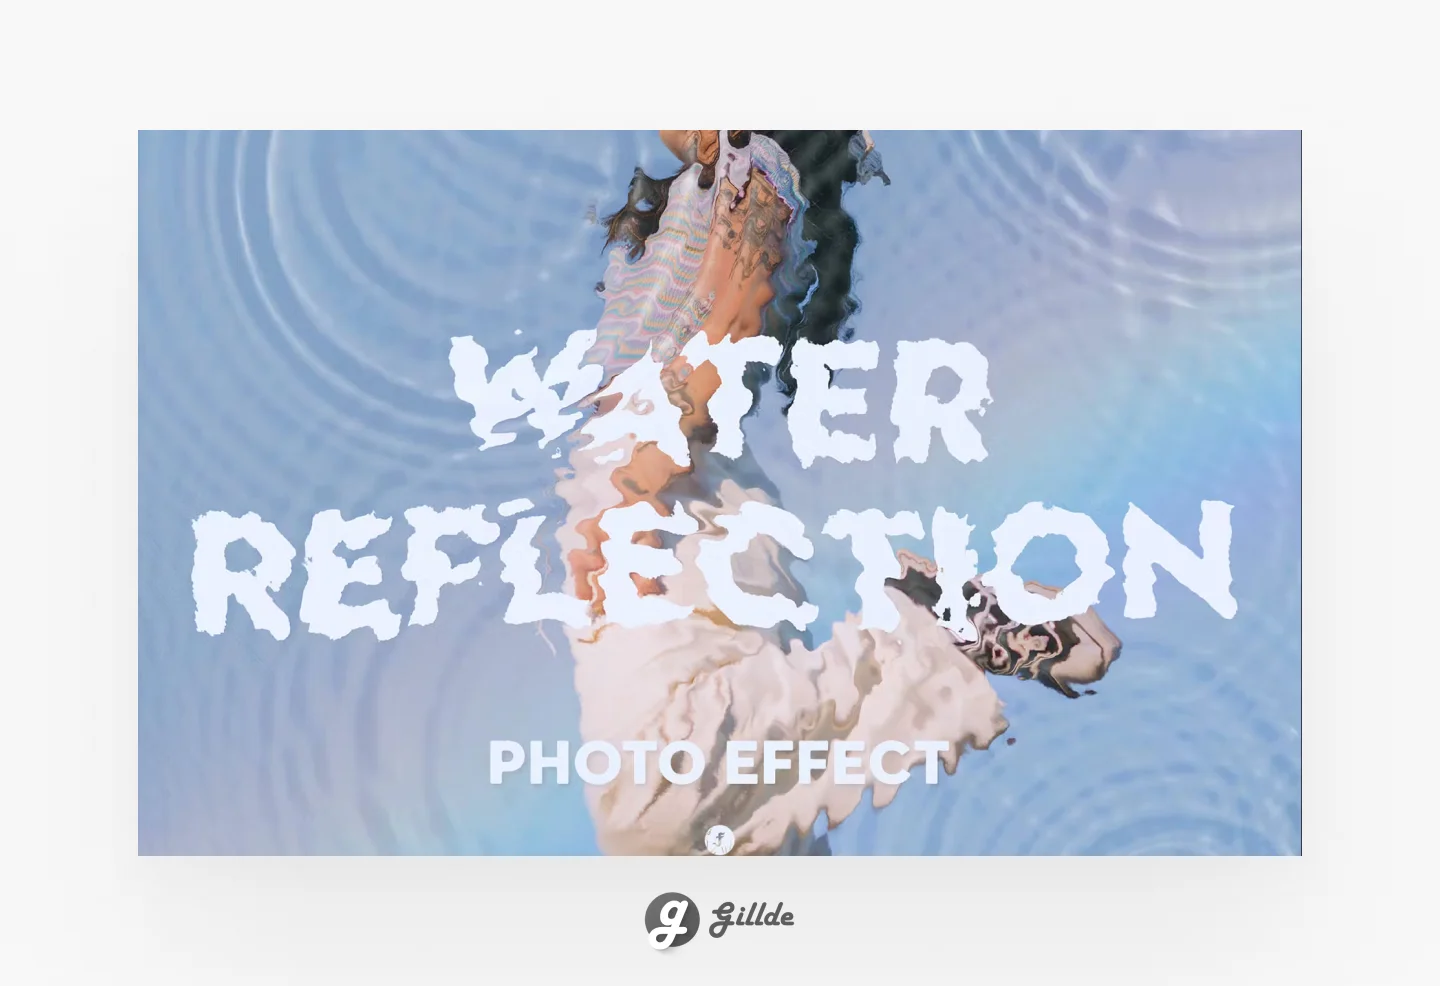 water reflection effects